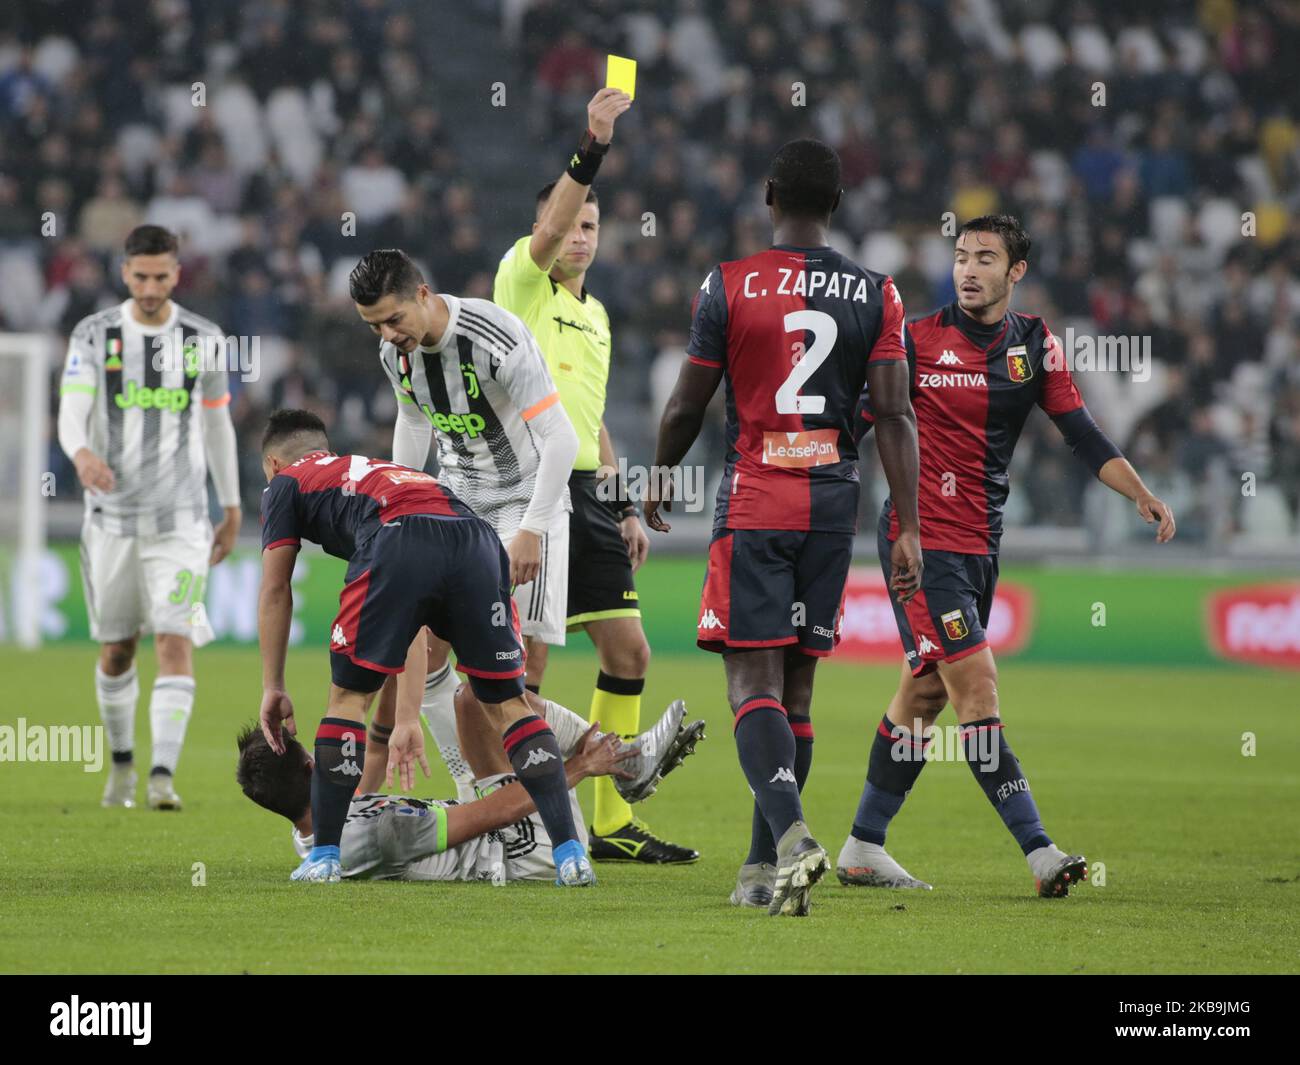 Cristián Zapata during the Serie A football match between Juventus FC and Genoa CFC at Allianz Stadium on October 30, 2019 in Turin, Italy. (Photo by Loris Roselli). Stock Photo